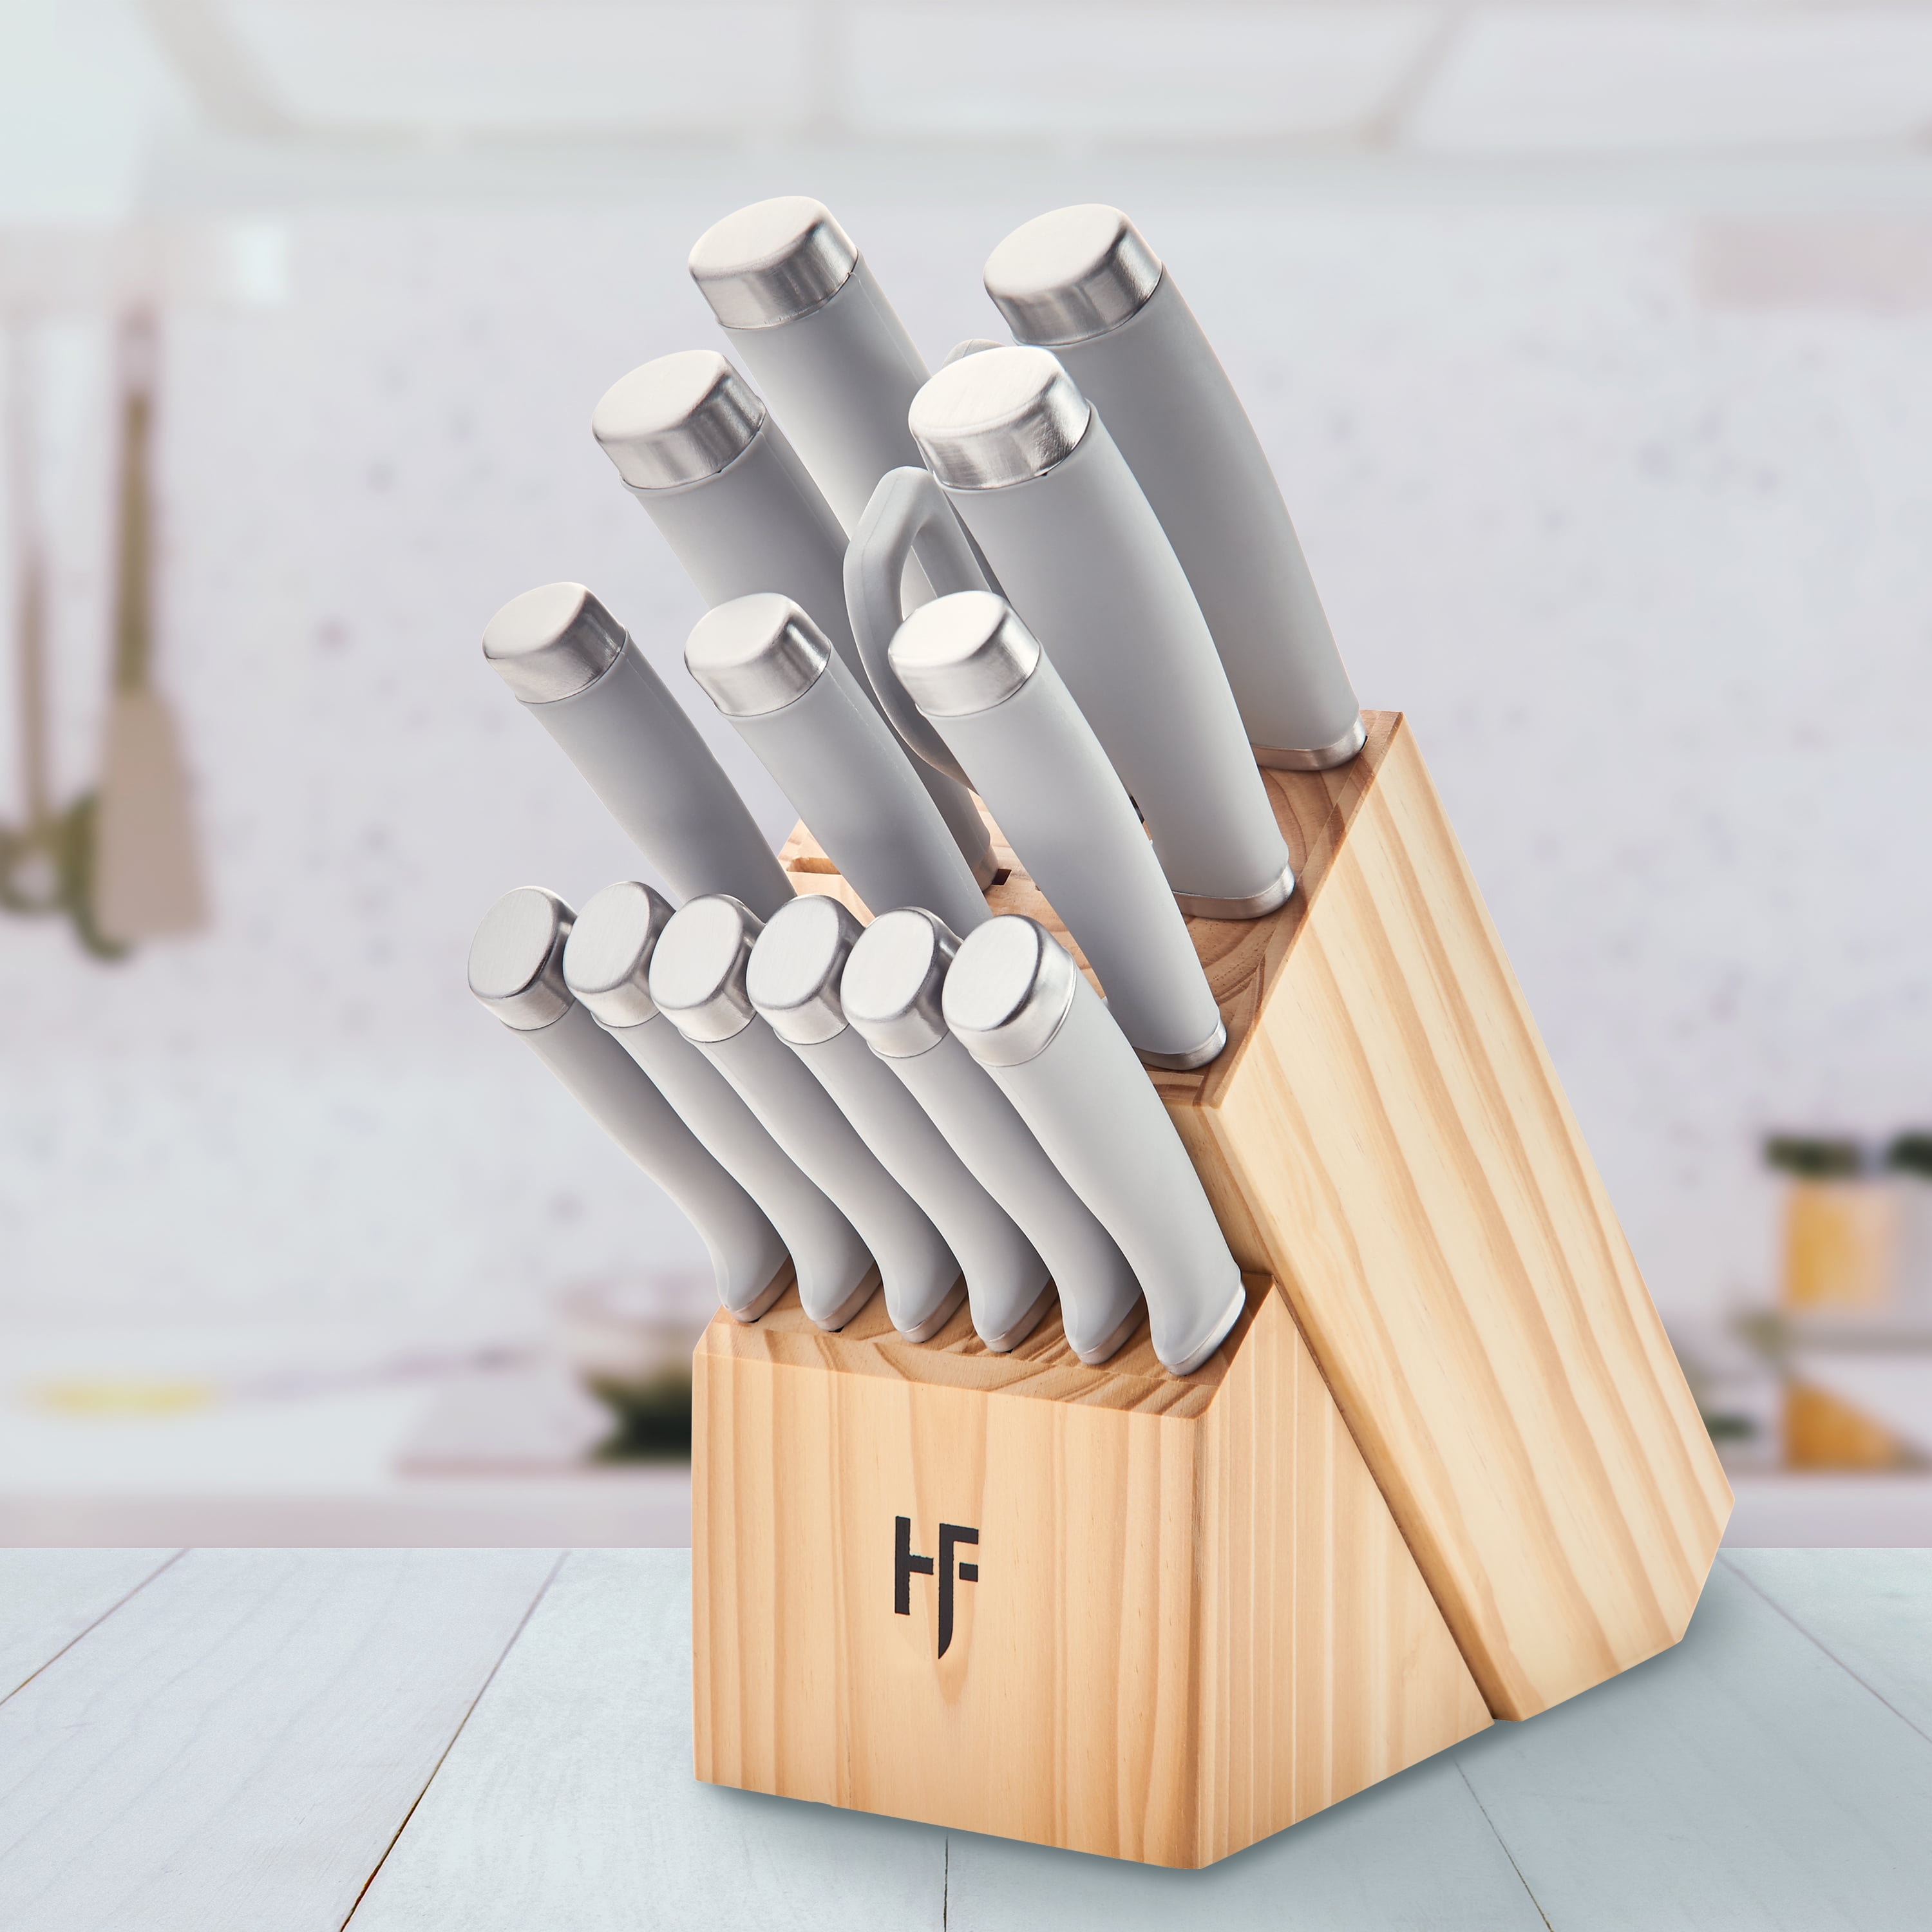 Hampton Forge Knight Stainless Steel Cutlery Block Set - Copper, 13 pc -  Fry's Food Stores